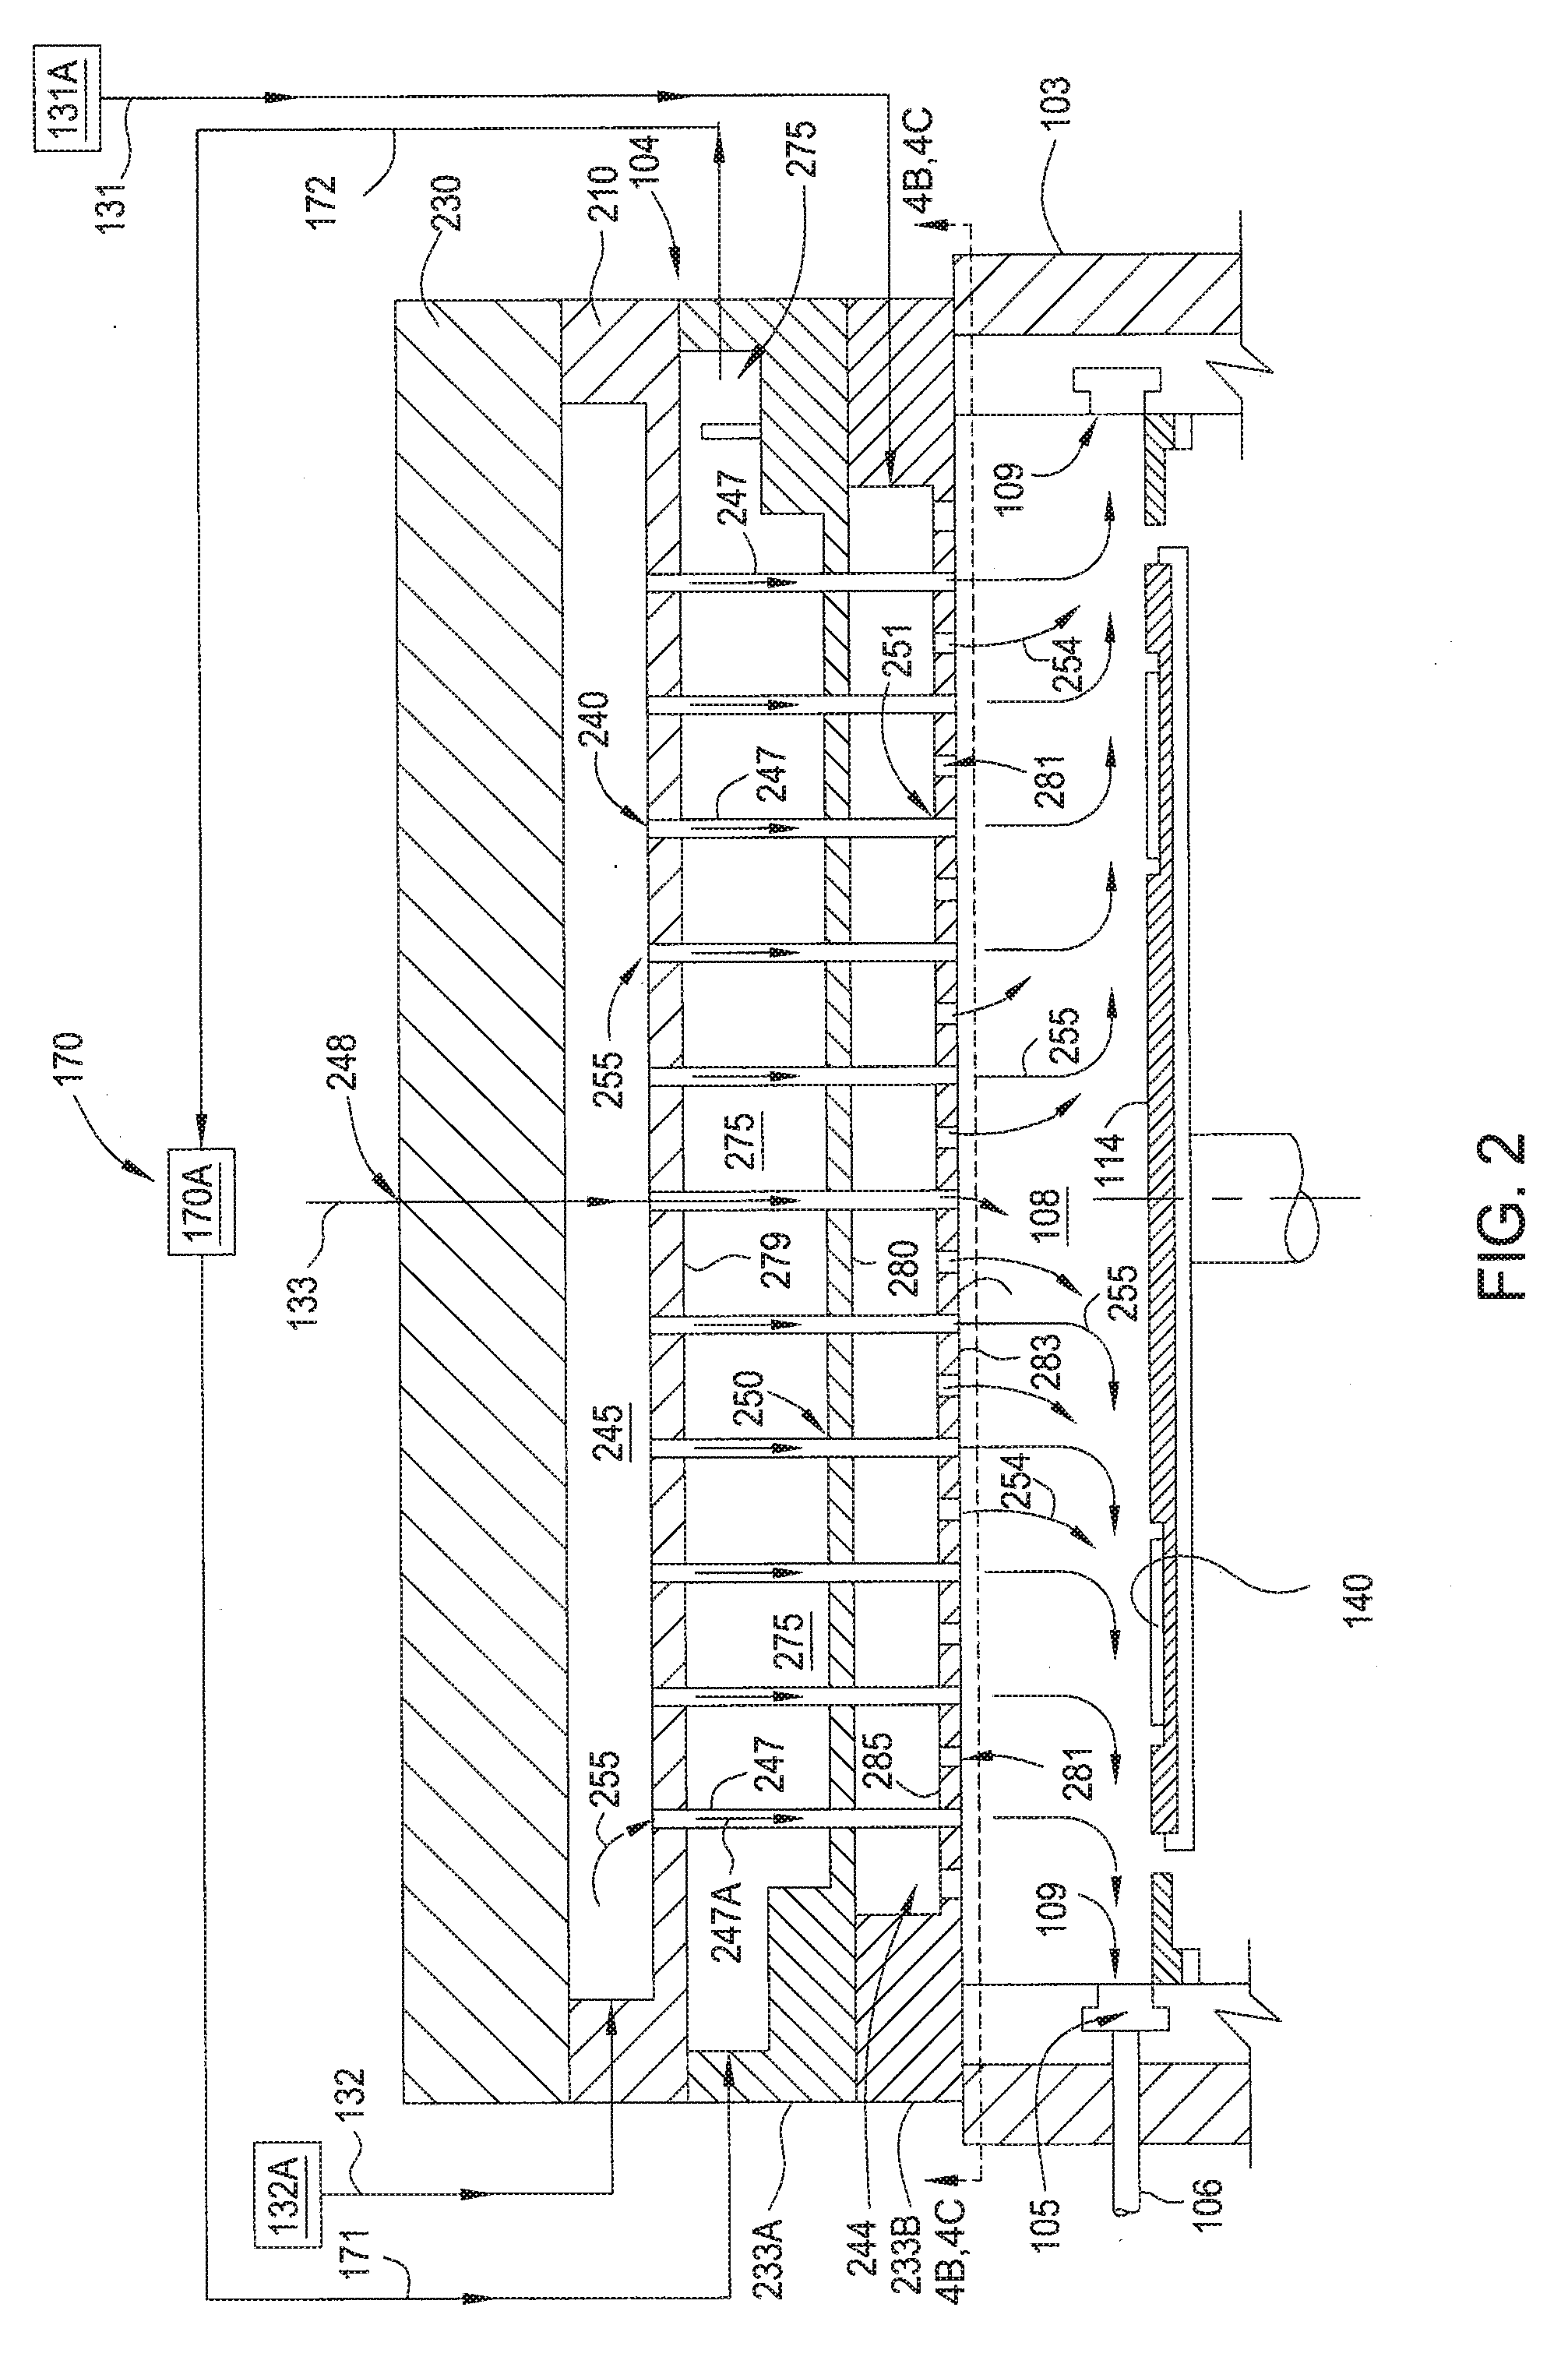 Multi-gas centrally cooled showerhead design